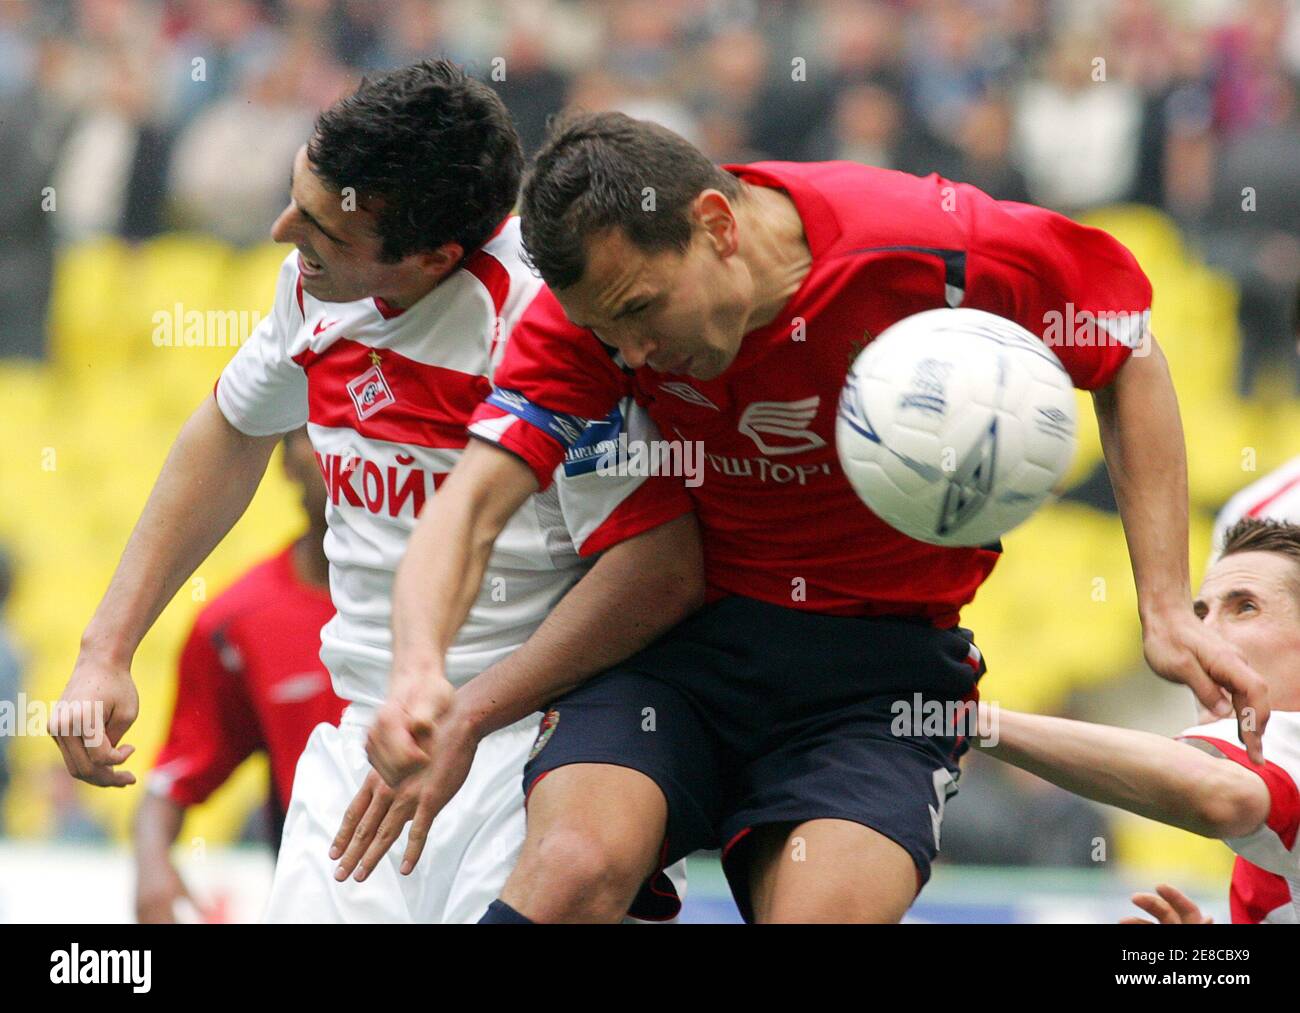 Sergei Ignashevich of CSKA Moscow (R) fights for the ball with Nikita  Bazhenov of Spartak Moscow during their Russian Cup final match in Moscow  May 20, 2006. CSKA kept hold of the